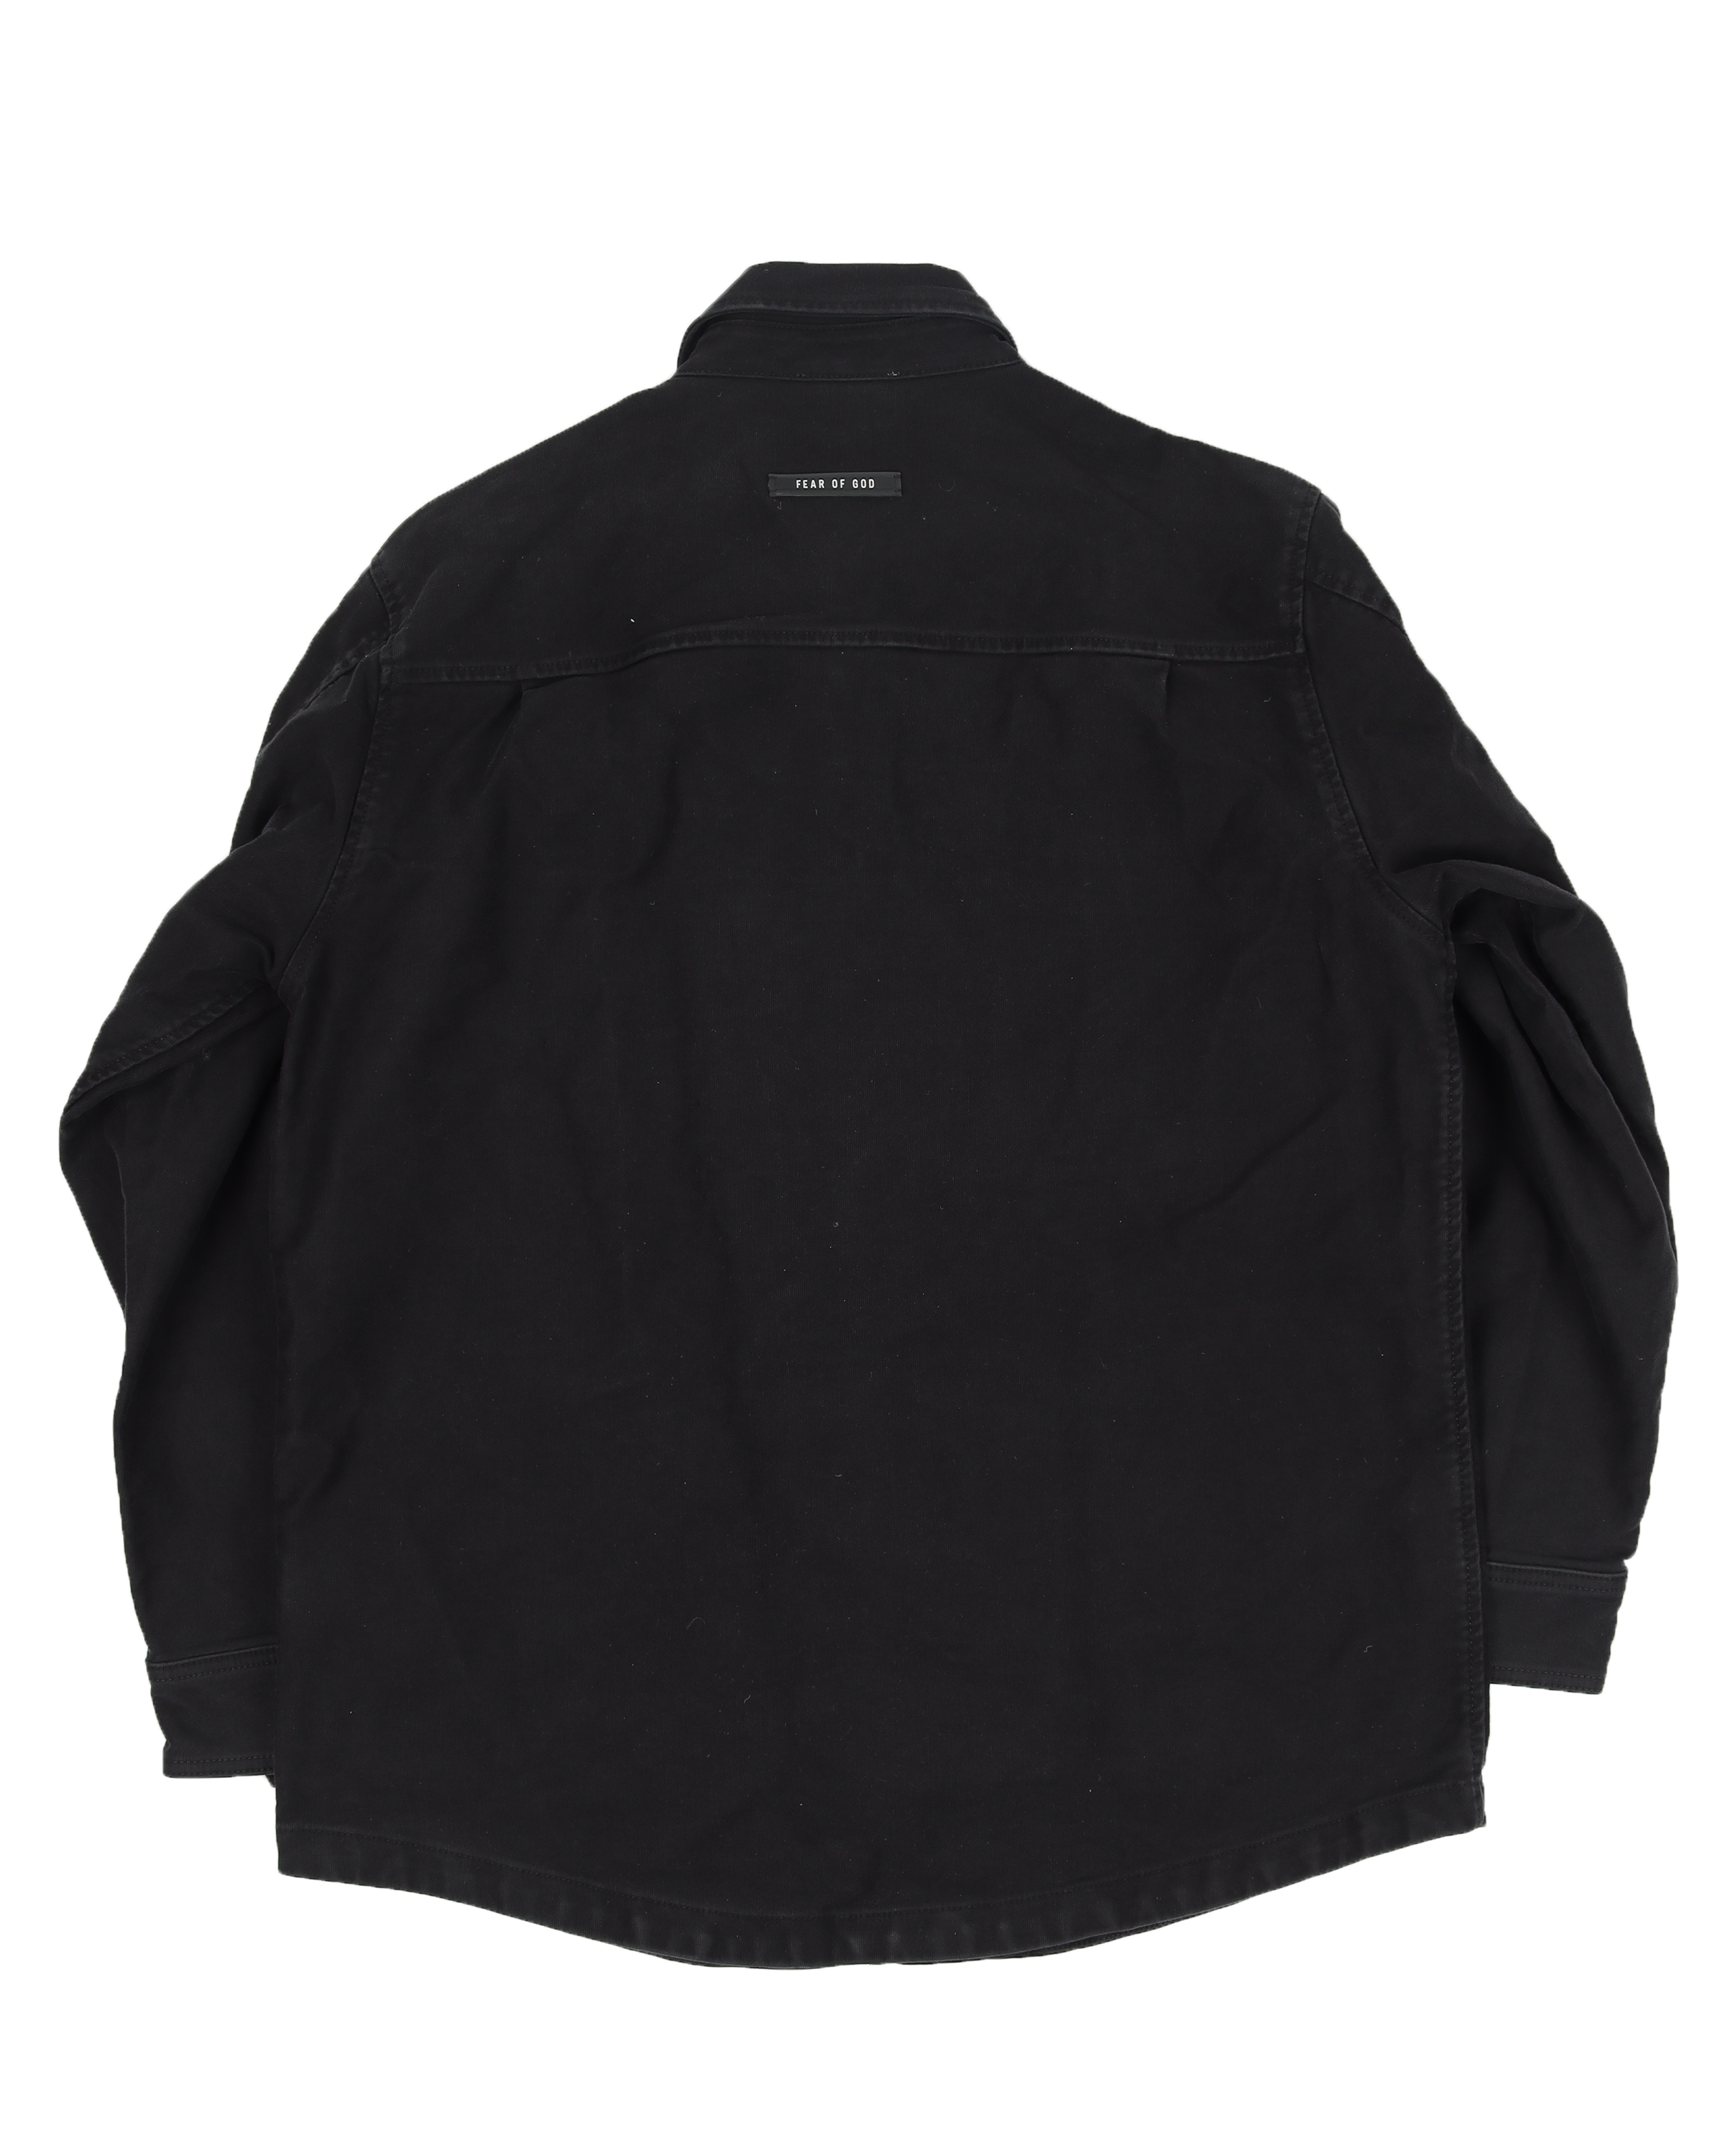 Sixth Collection Button Over Shirt